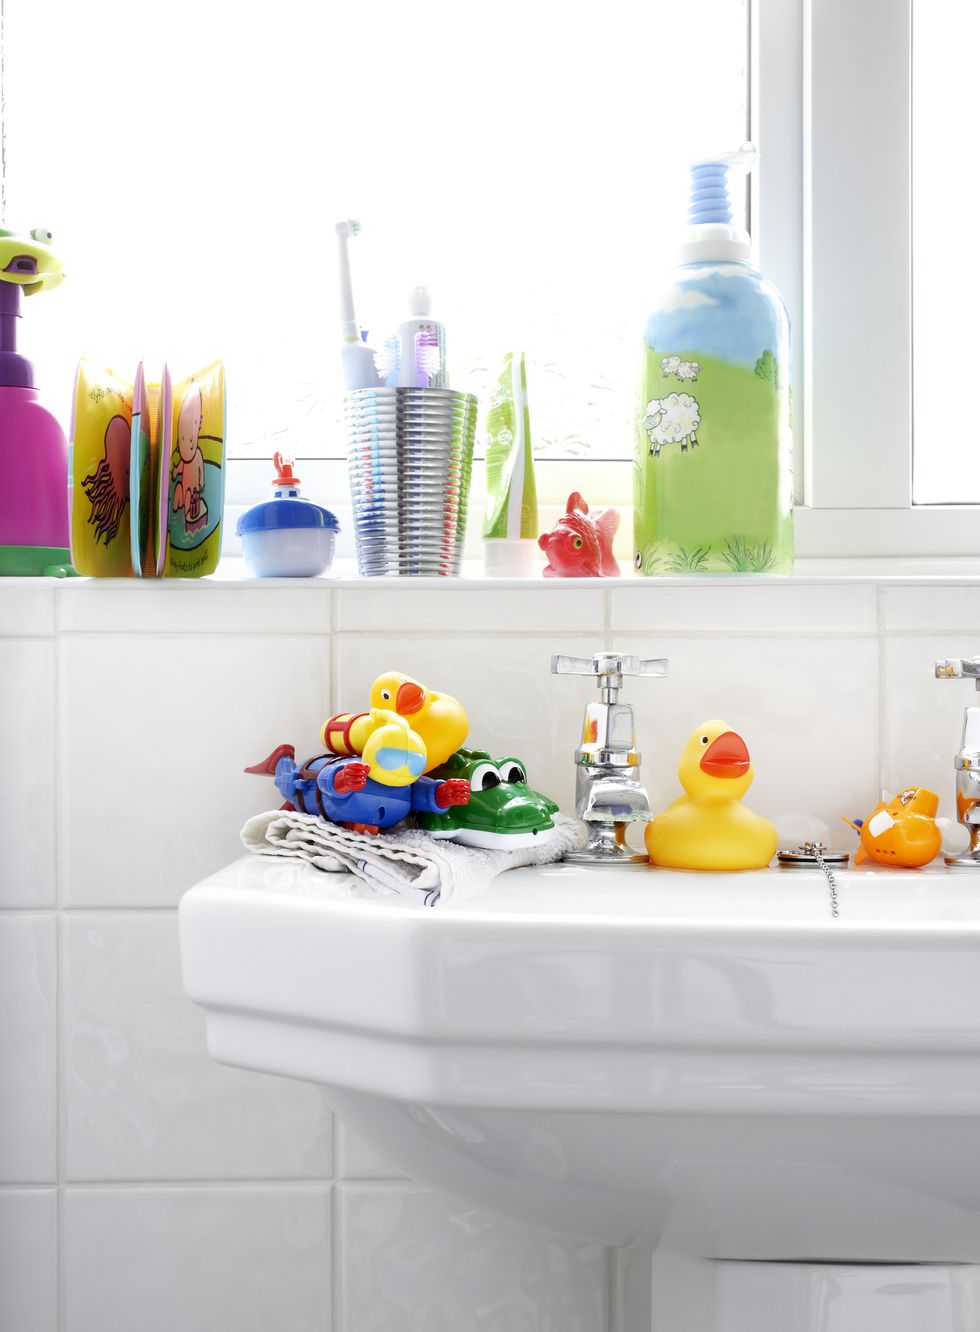 Bathroom Essentials to Wash More Often – Laundry Tips